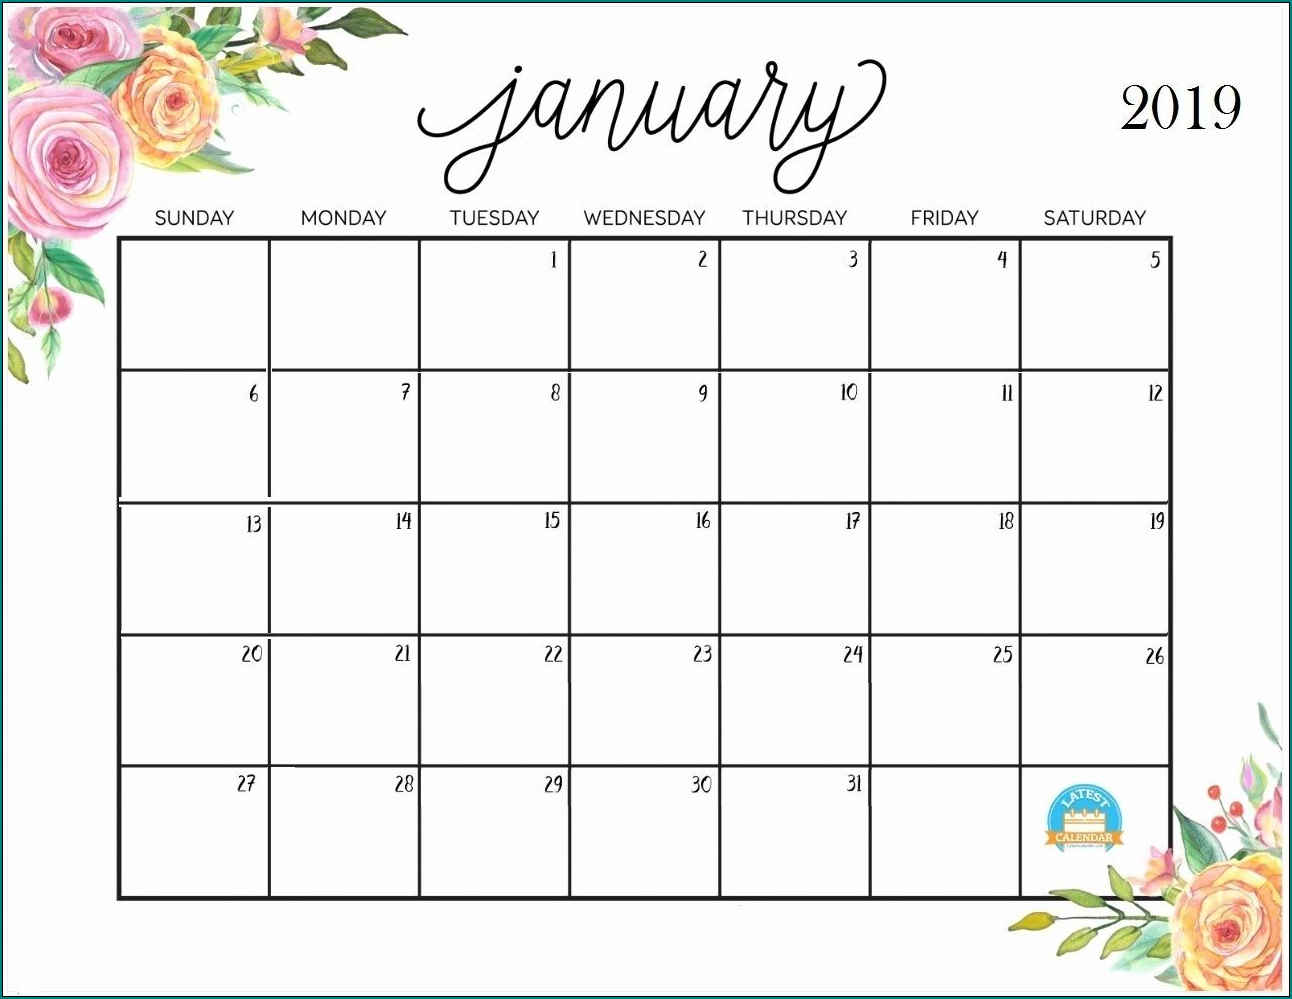 Example of Kids Schedule Template | Bogiolo